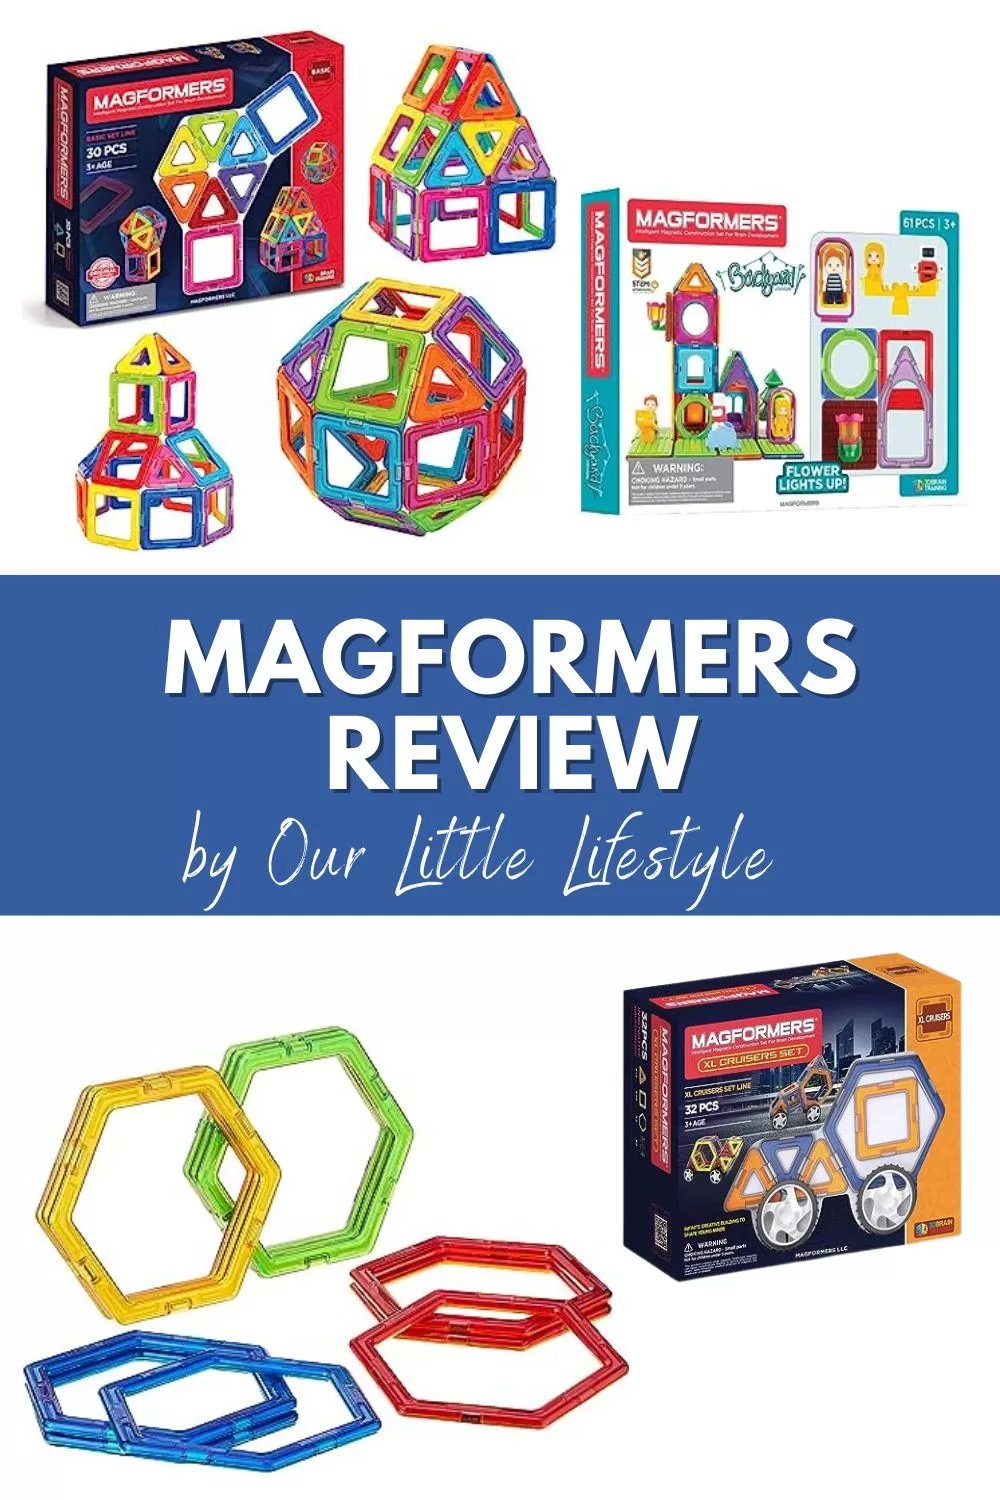 Deals on Magformers